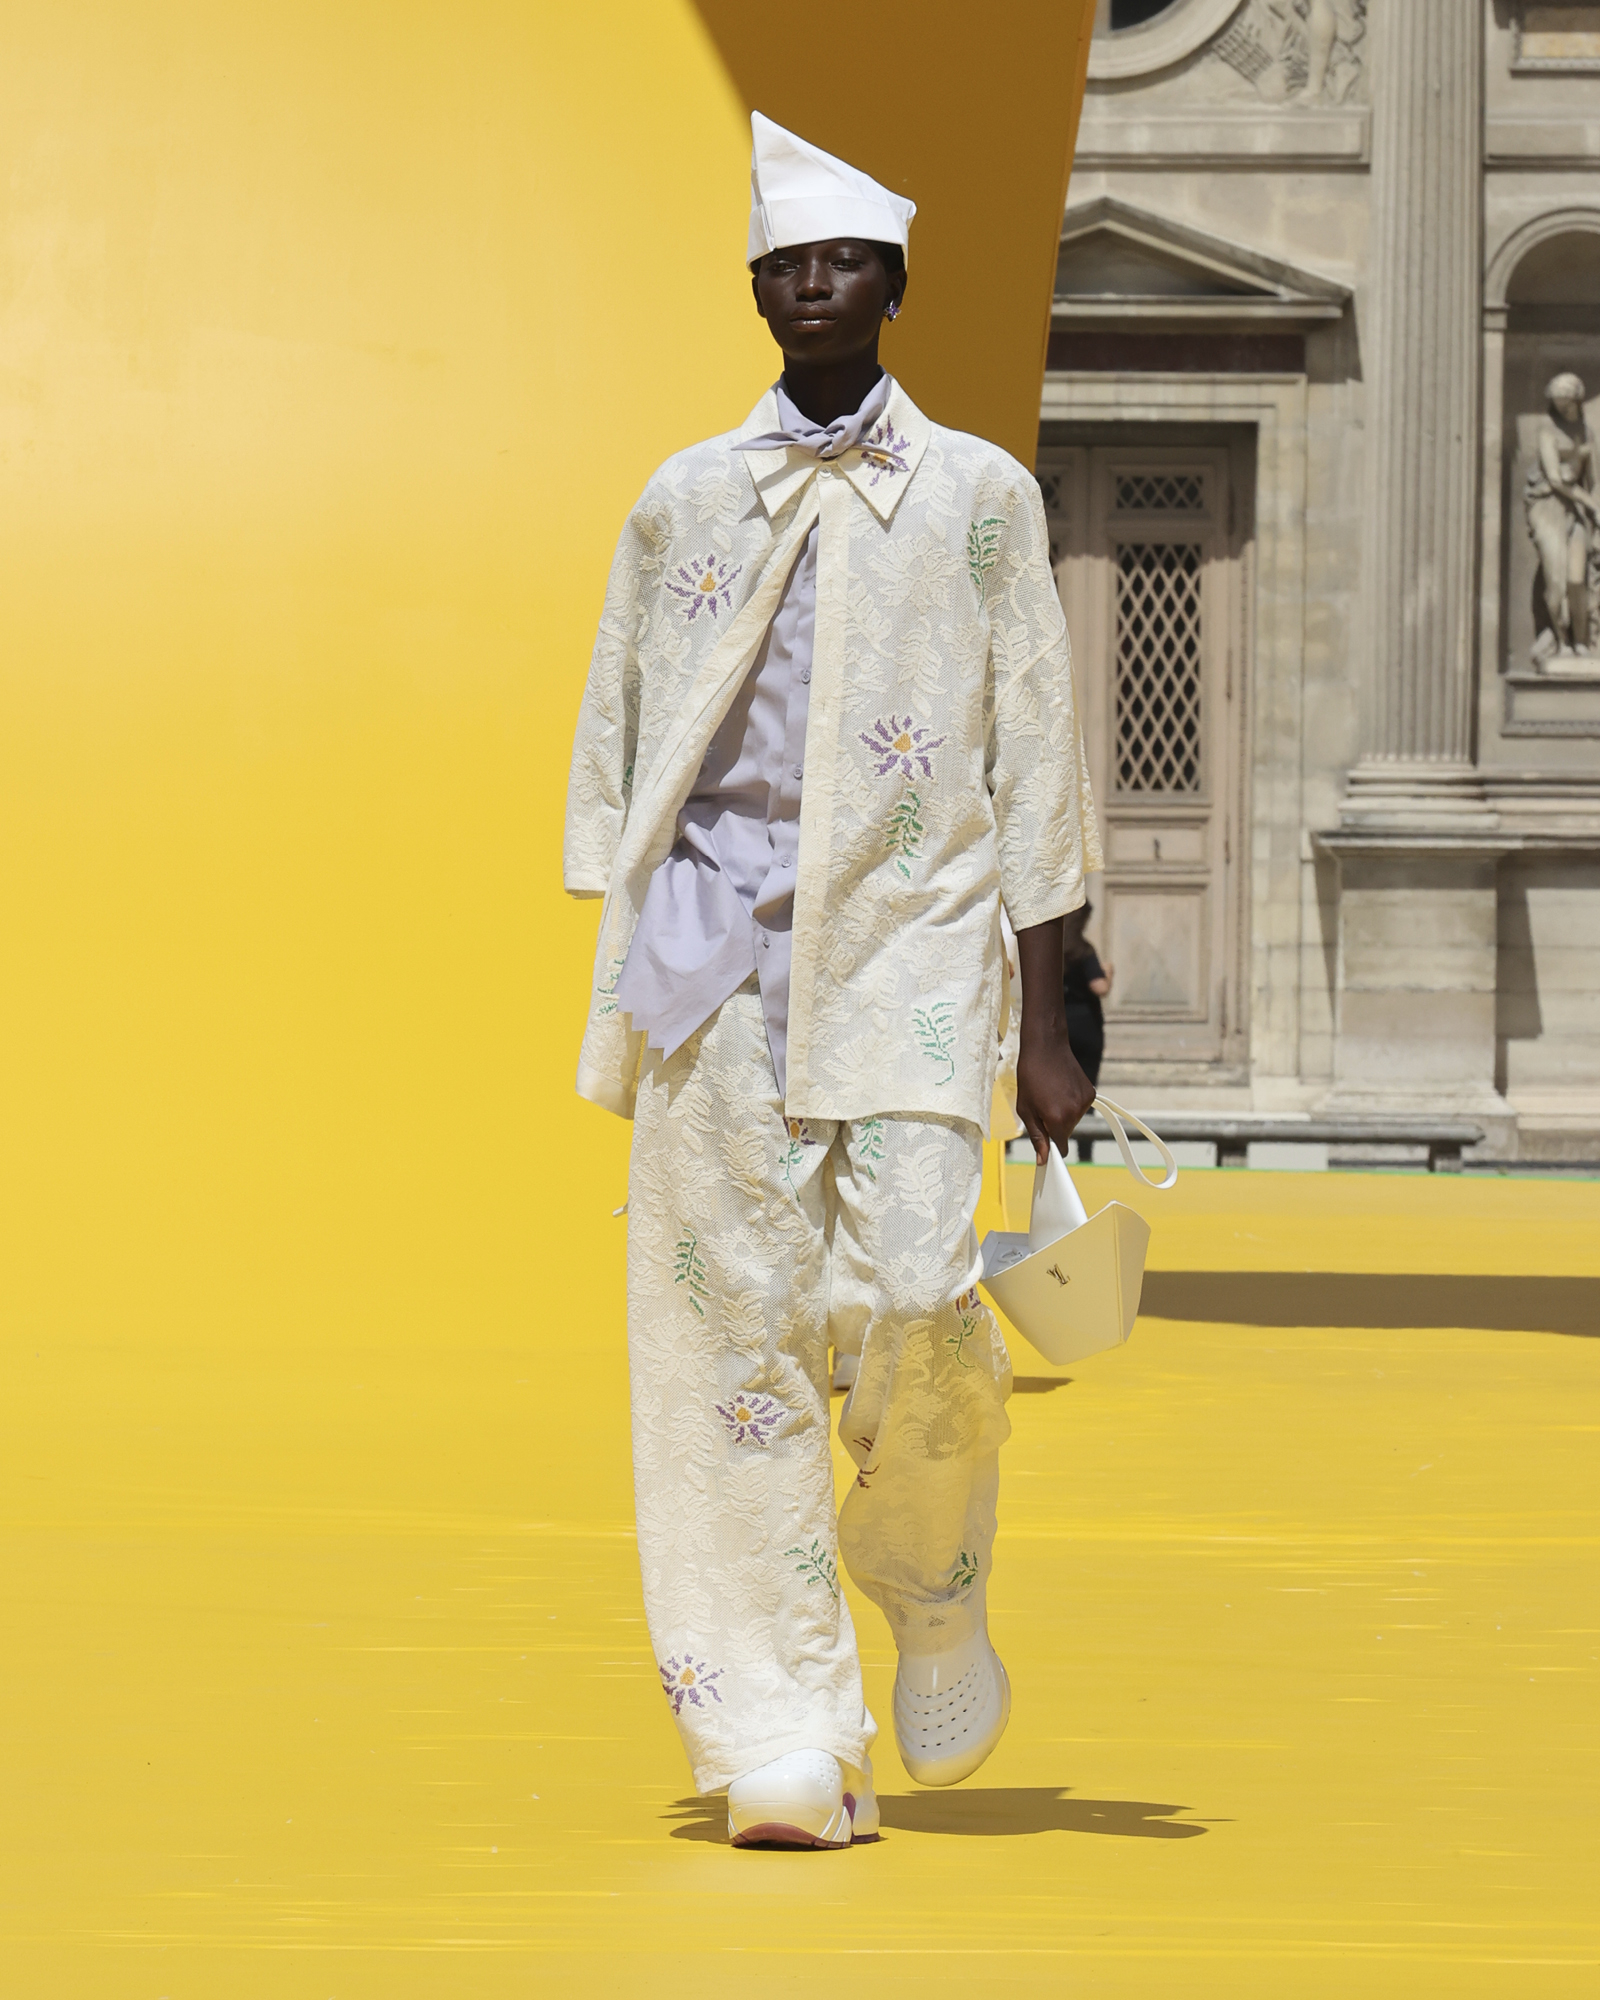 Imagination is at the Heart of Louis Vuitton for their Men's SS23